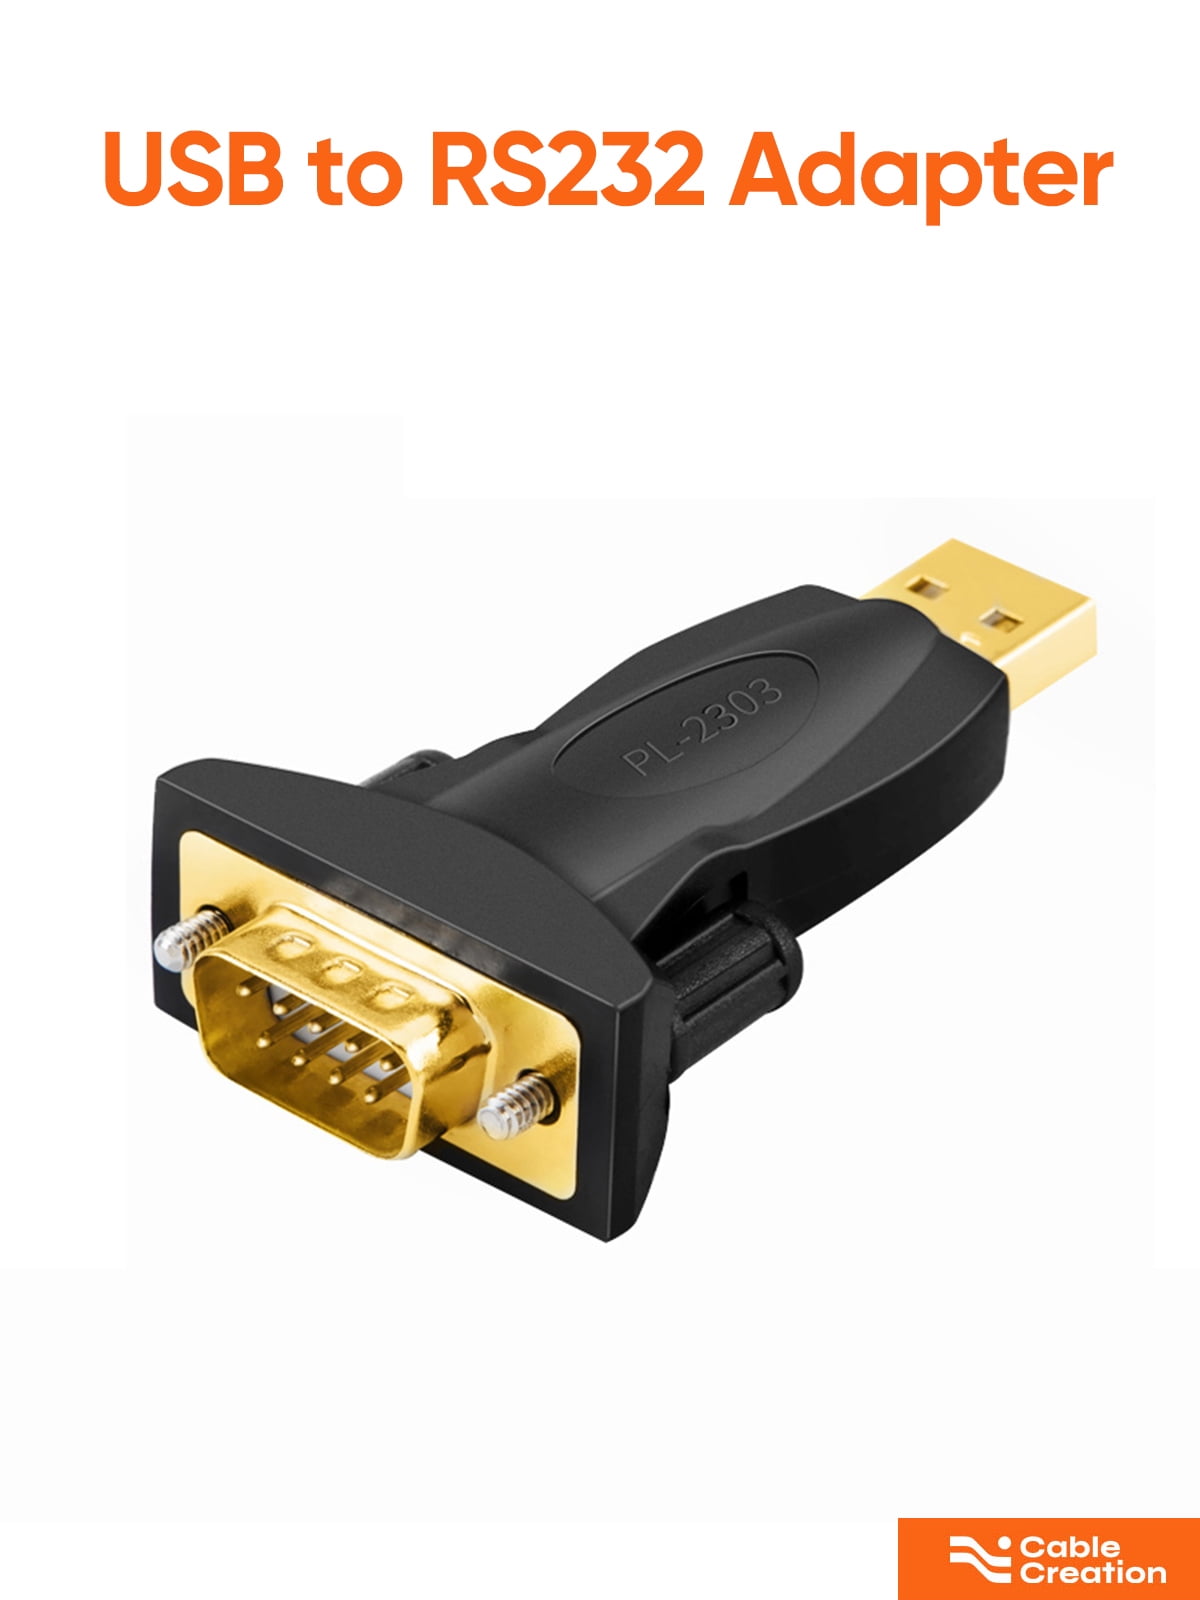 th tang jazz CableCreation USB to Serial Adapter, USB to RS232 Converter, USB to DB9,  RS232 Converter 9-Pin FTDI Chipset for Windows , Mac OS and Linux -  Walmart.com